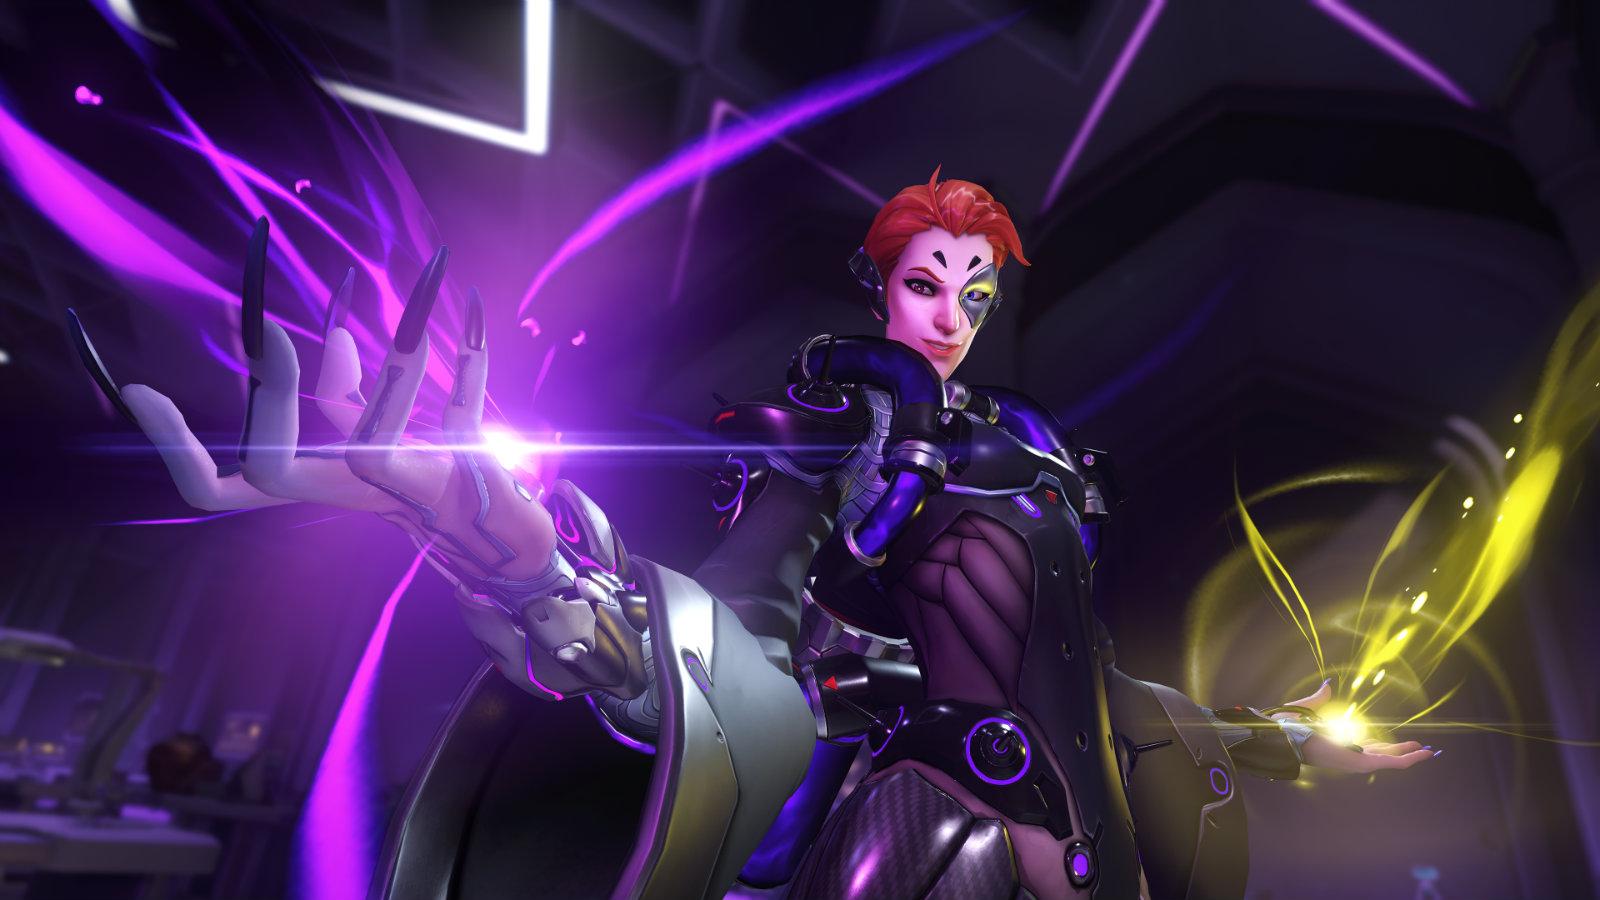 Moira activated Orbs